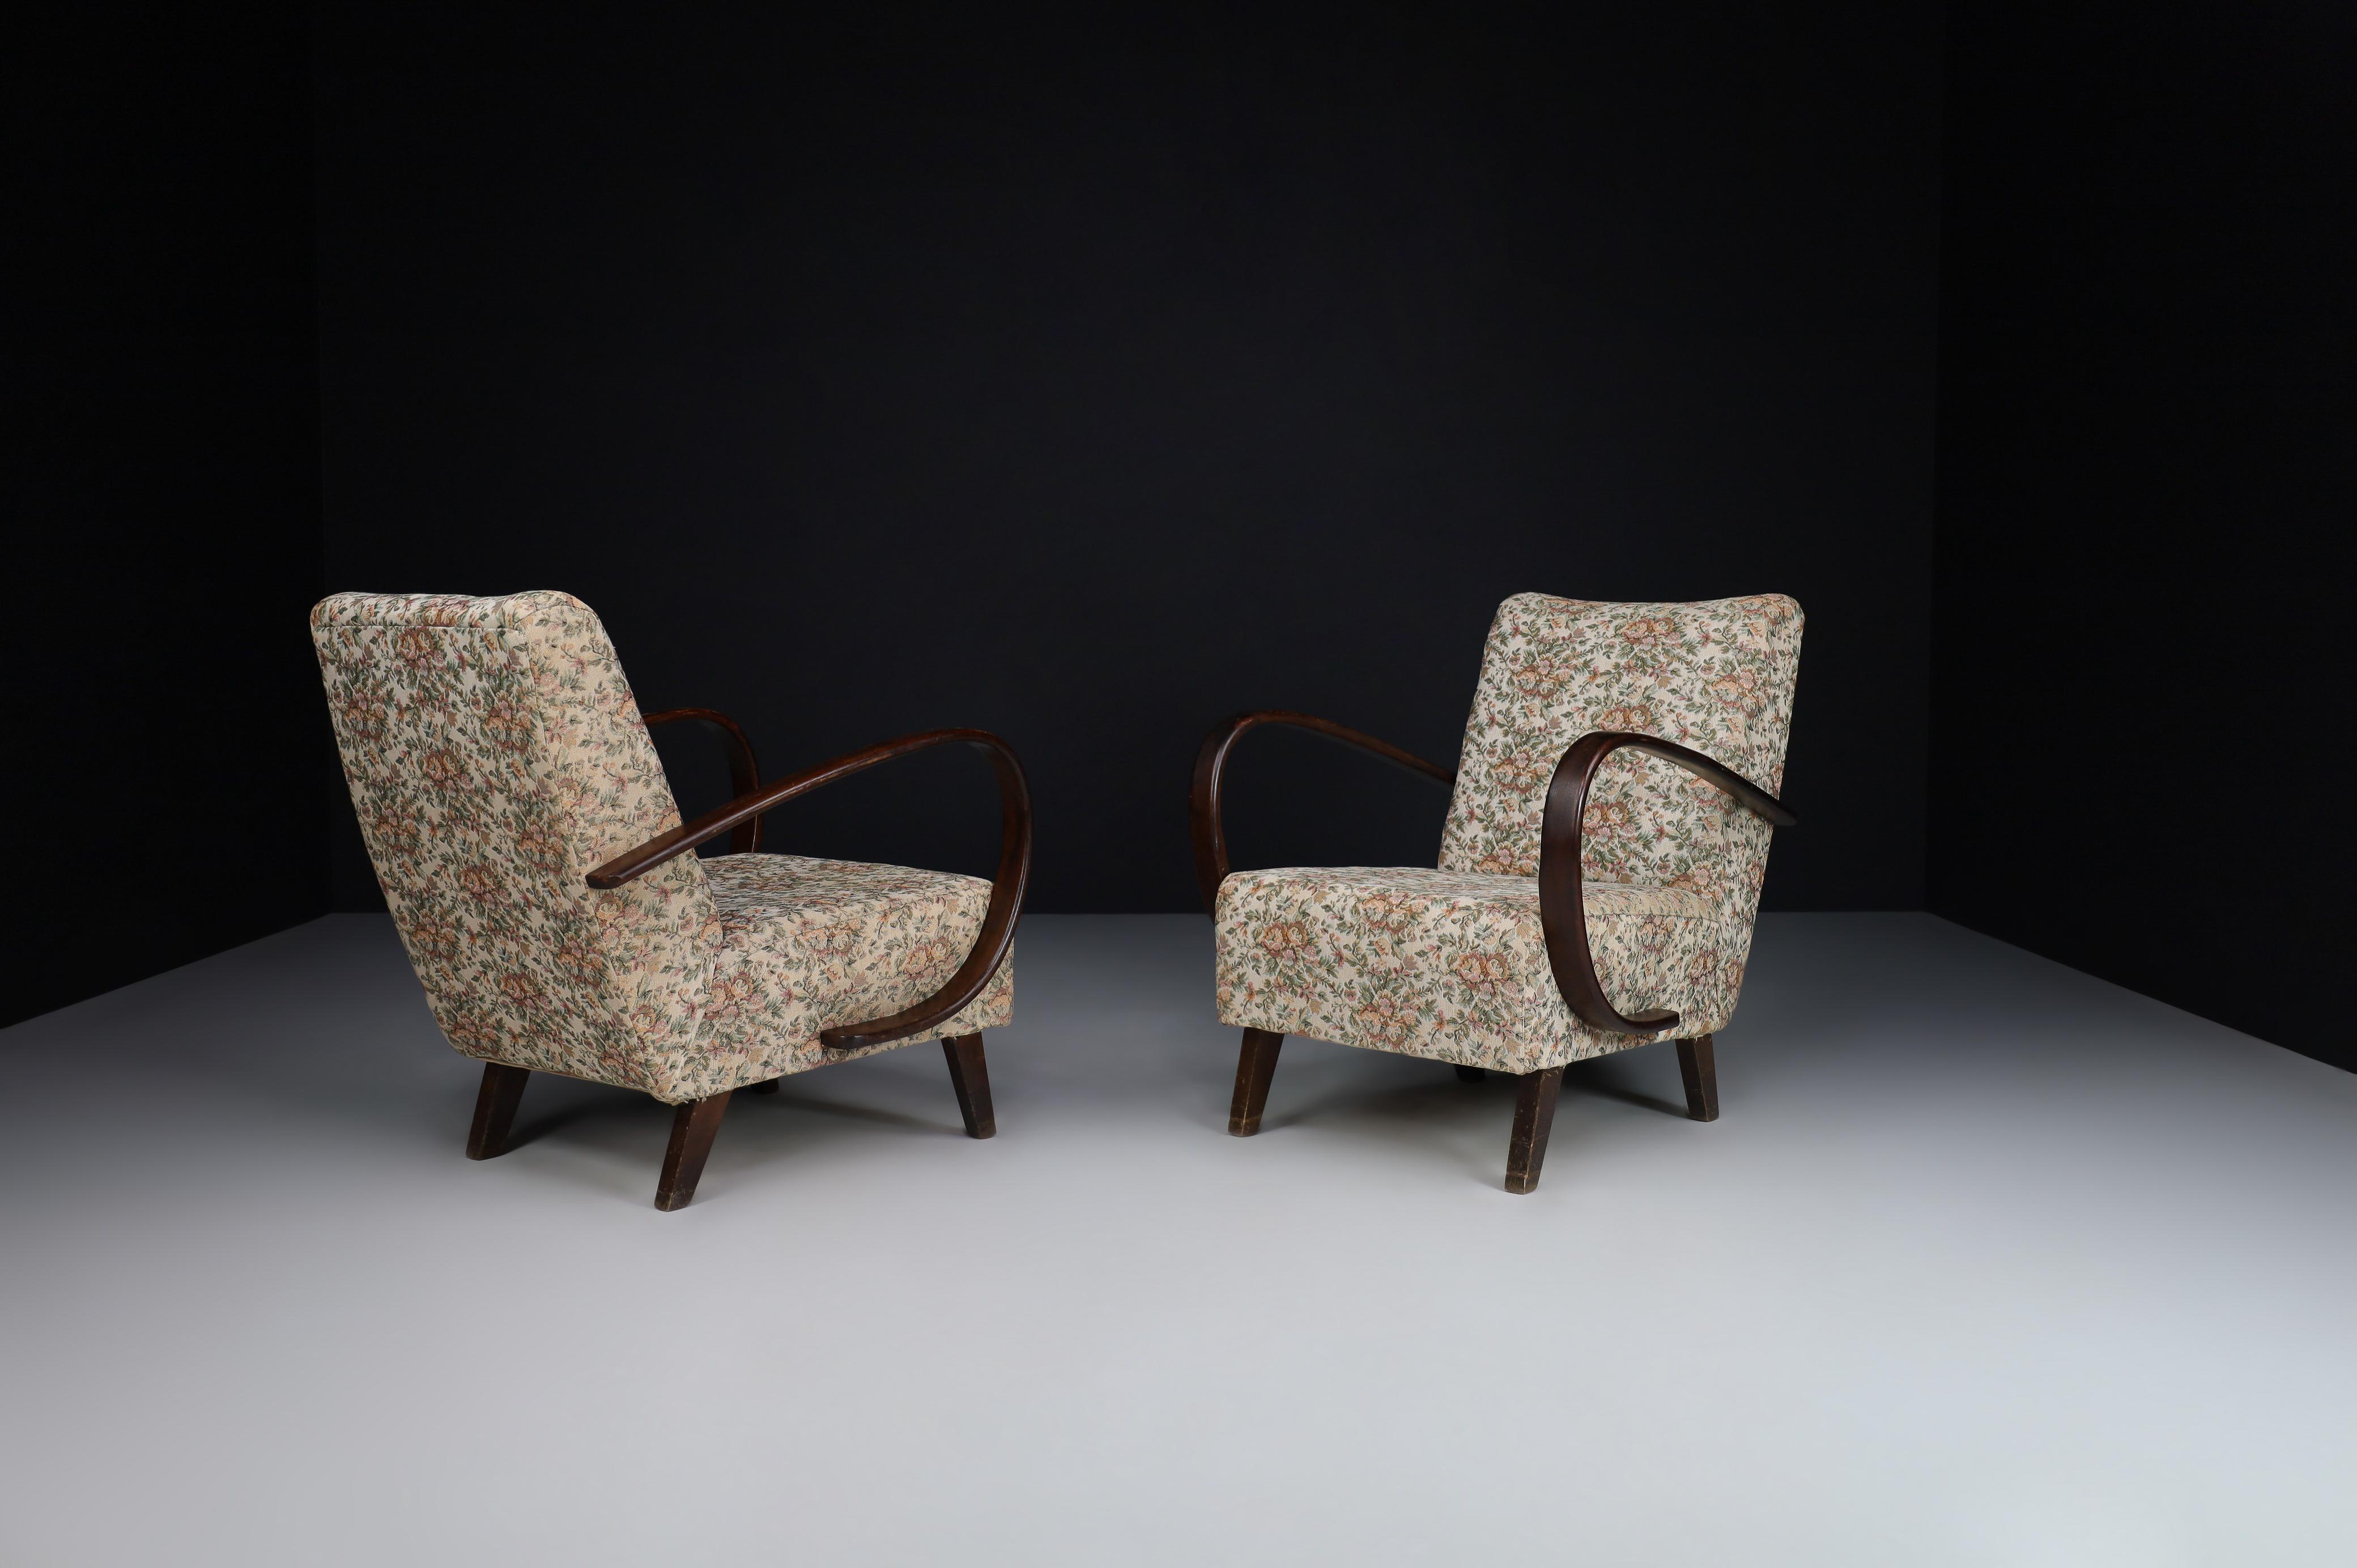 20th Century Jindrich Halabala Bentwood Armchairs with Original Floral Upholstery, 1940s